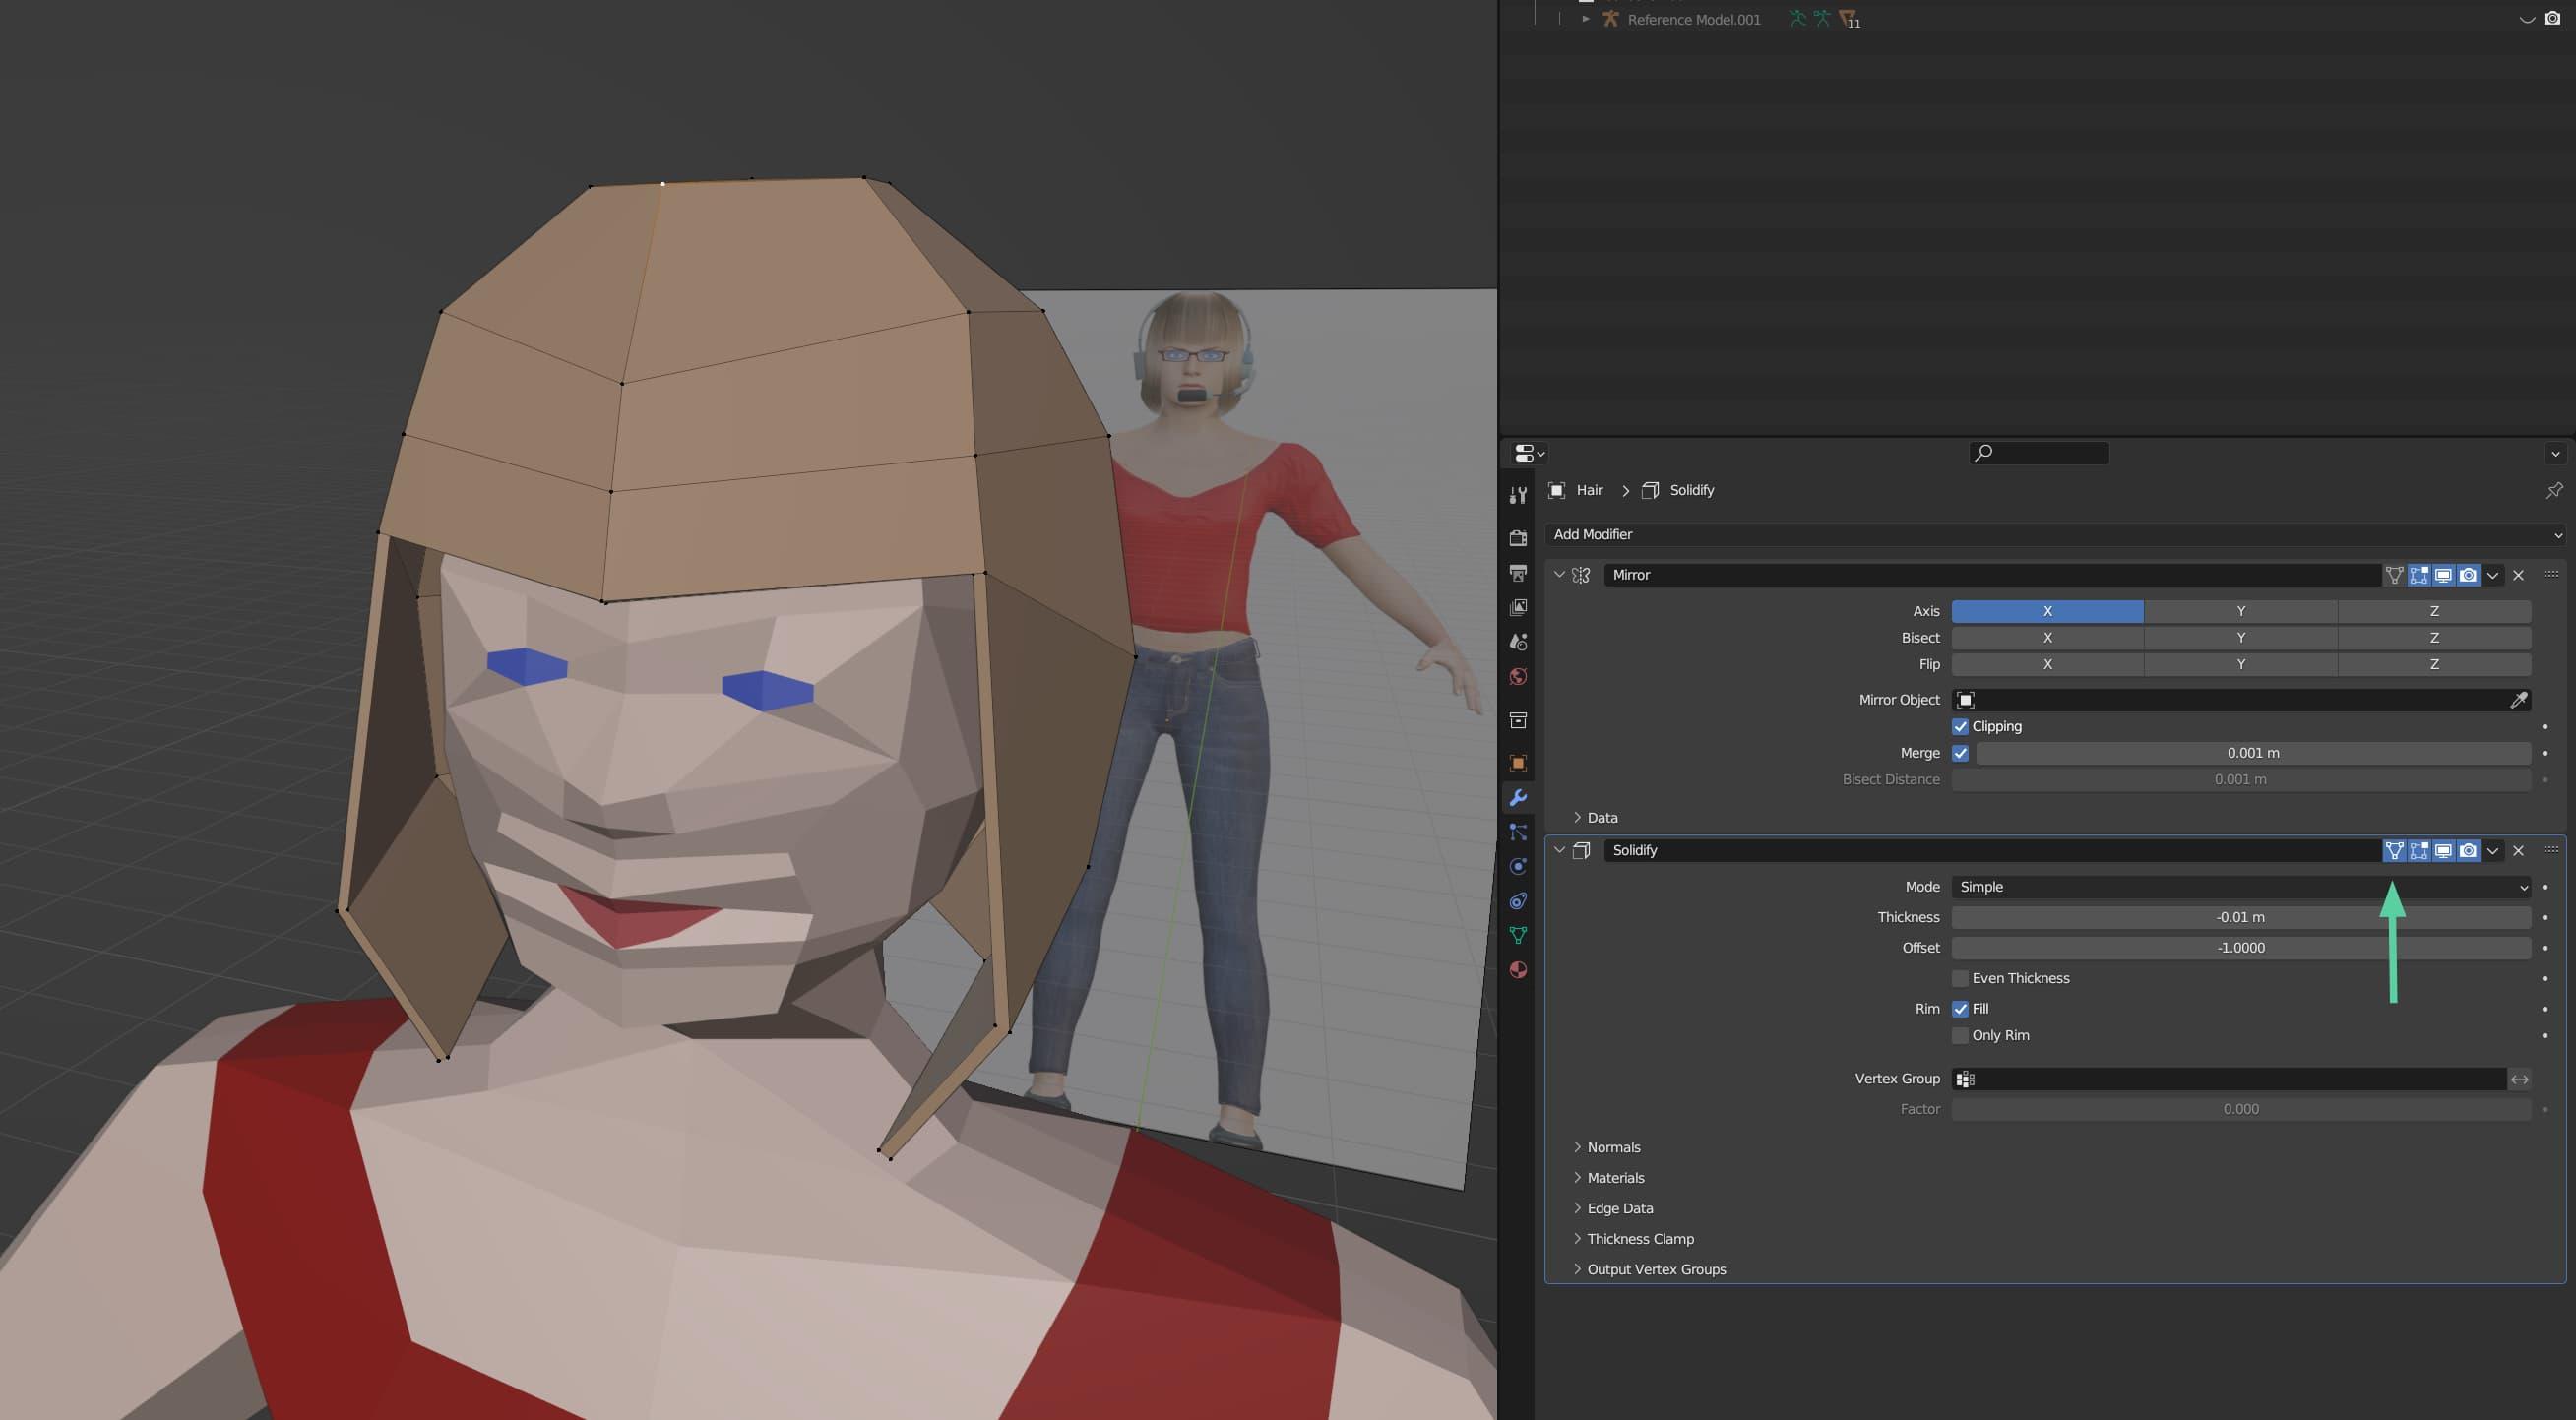 The model now has blonde hair, and the hair object has a mirror modifier and a solidify modifier applied to it. A small button on the solidify modifier menu has been selected